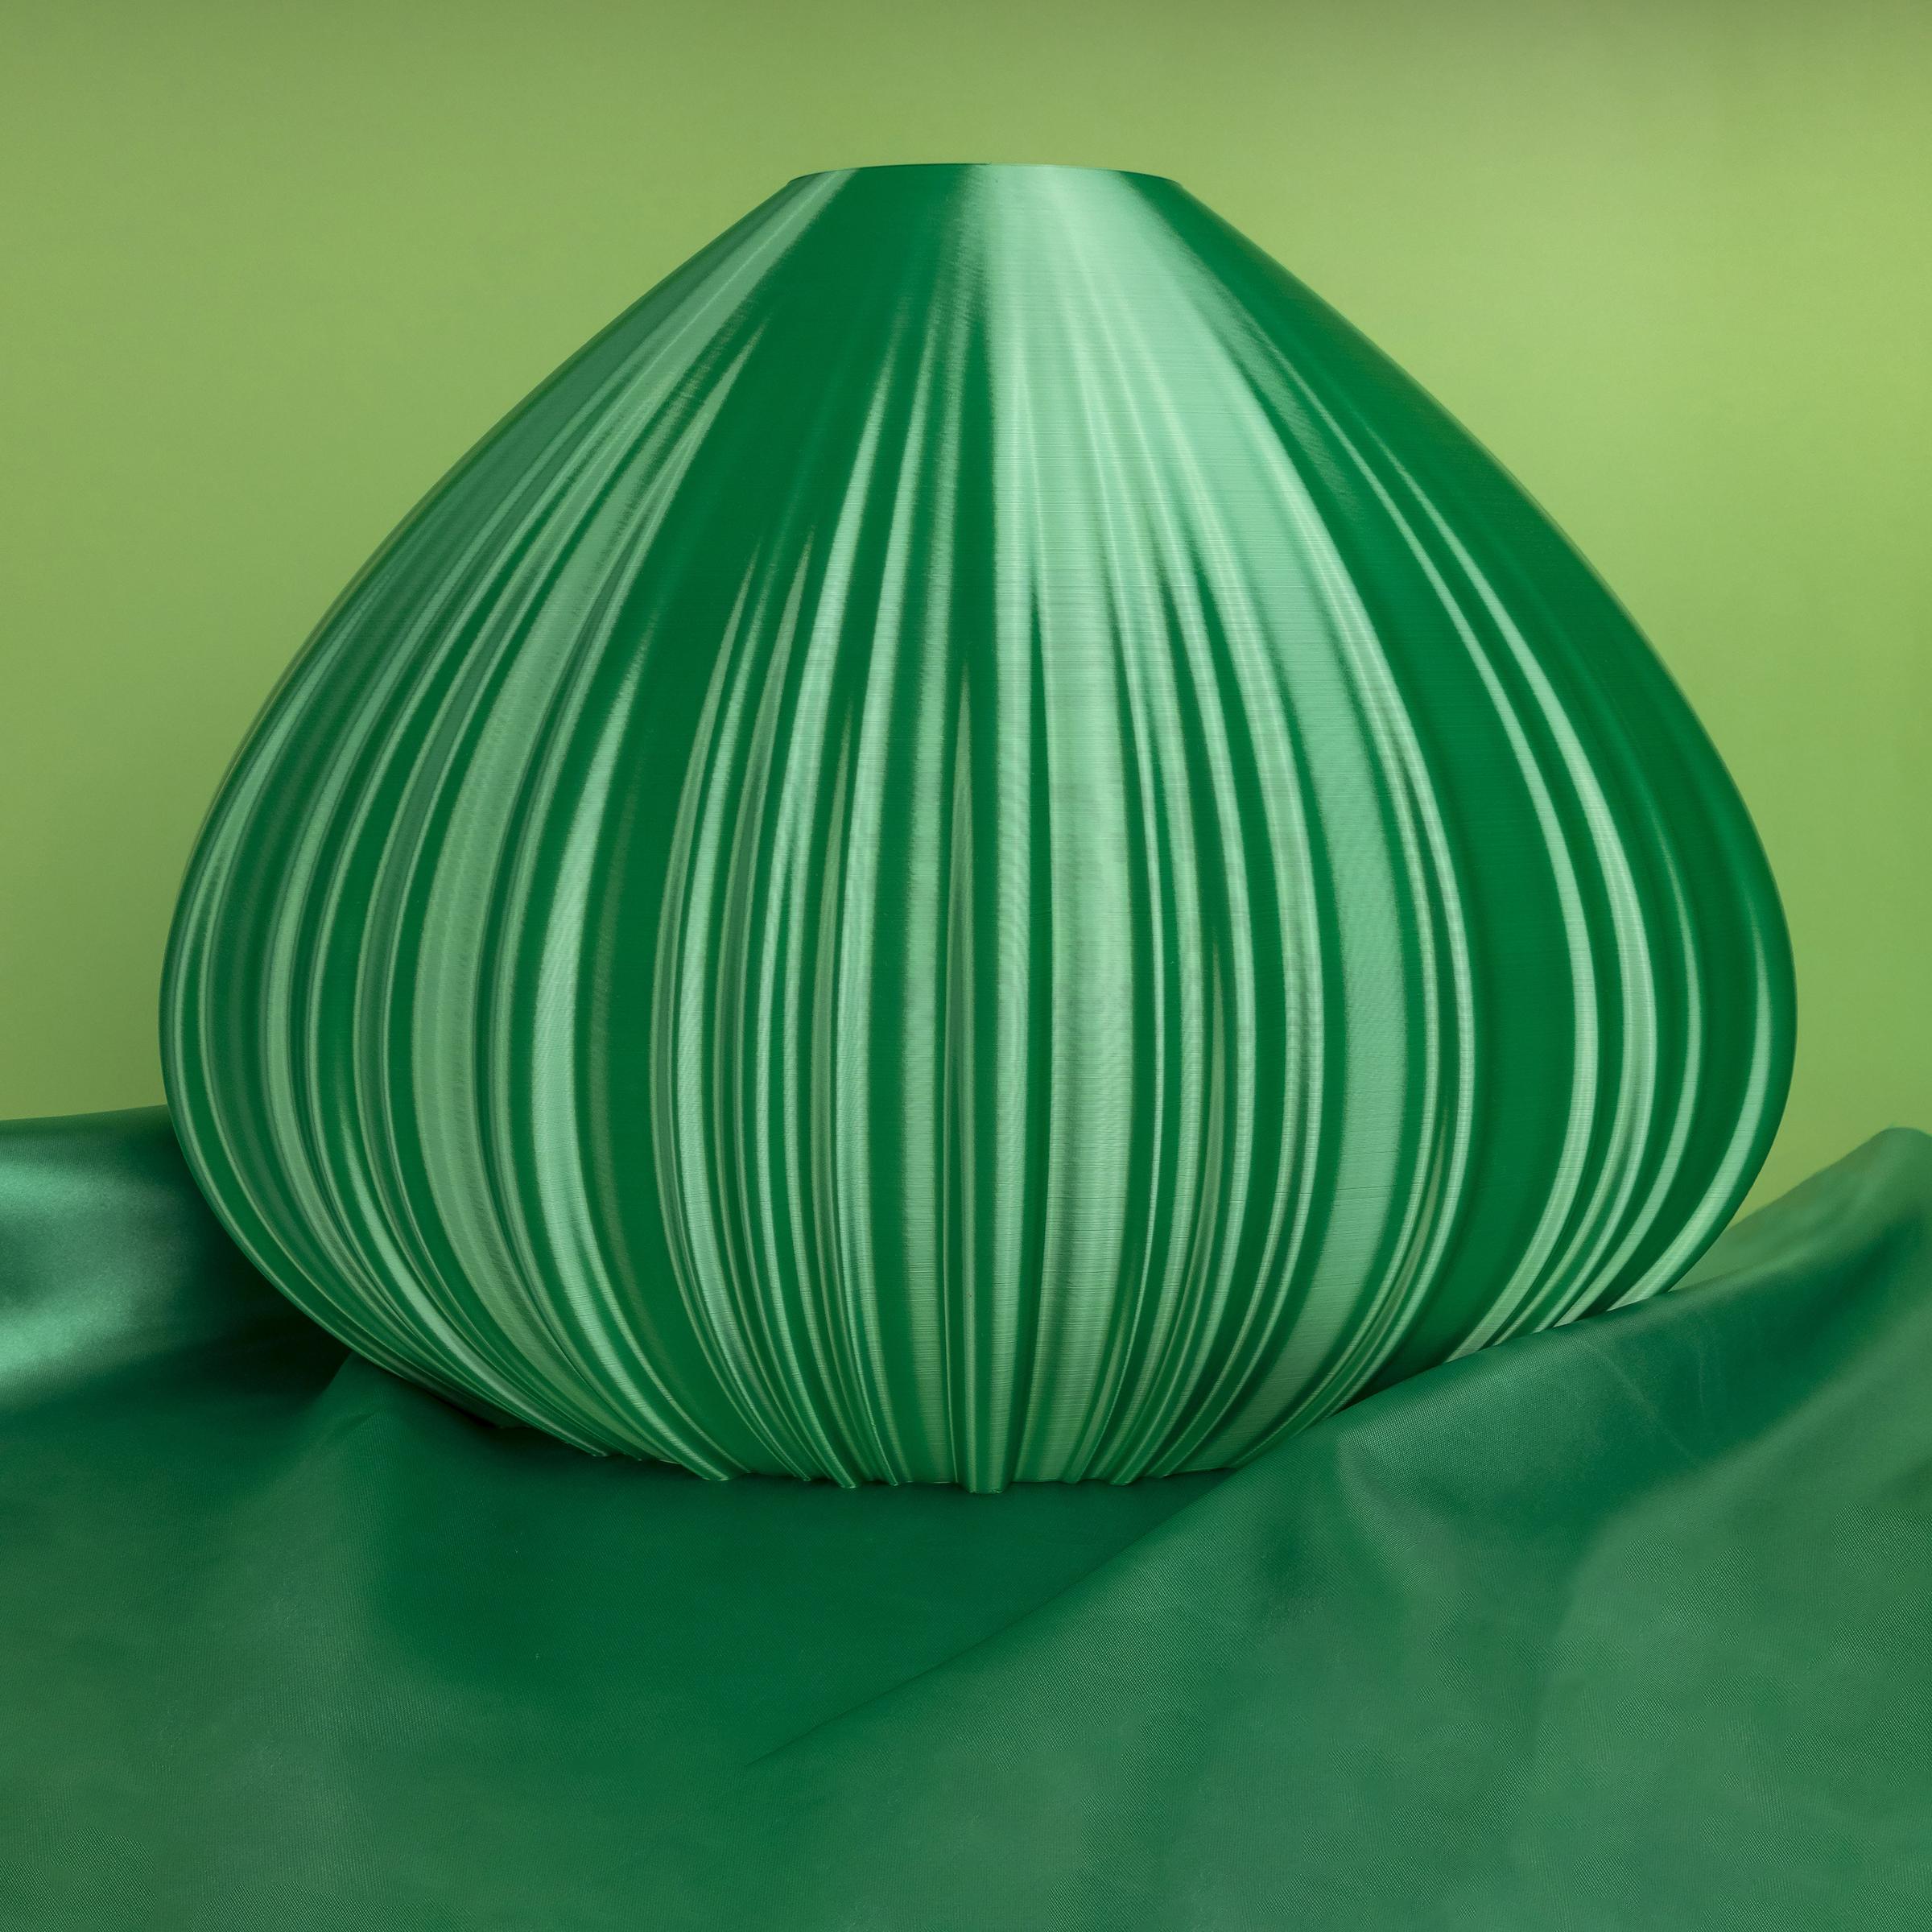 Vase-sculpture by DygoDesign

Showcasing an elegant drop-shaped profile, this gorgeous decorative sculpture is a singular design vase inspired by a chestnut. Fashioned of sustainable materials, its organic silhouette is finished in a mesmerizing